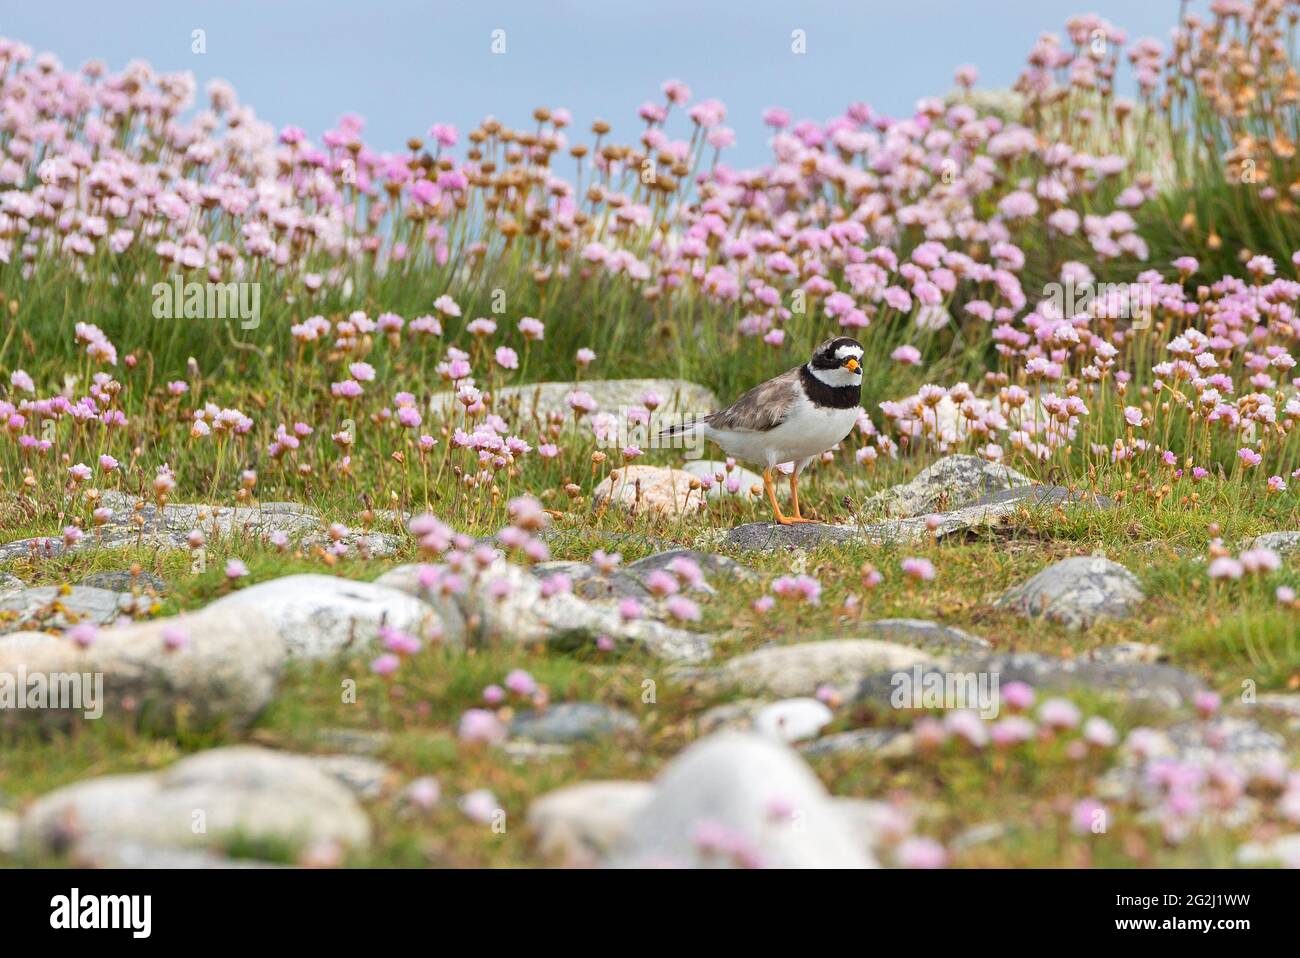 Ringed plover between pink carnations, Île de Sein, France, Brittany, Finistère department Stock Photo